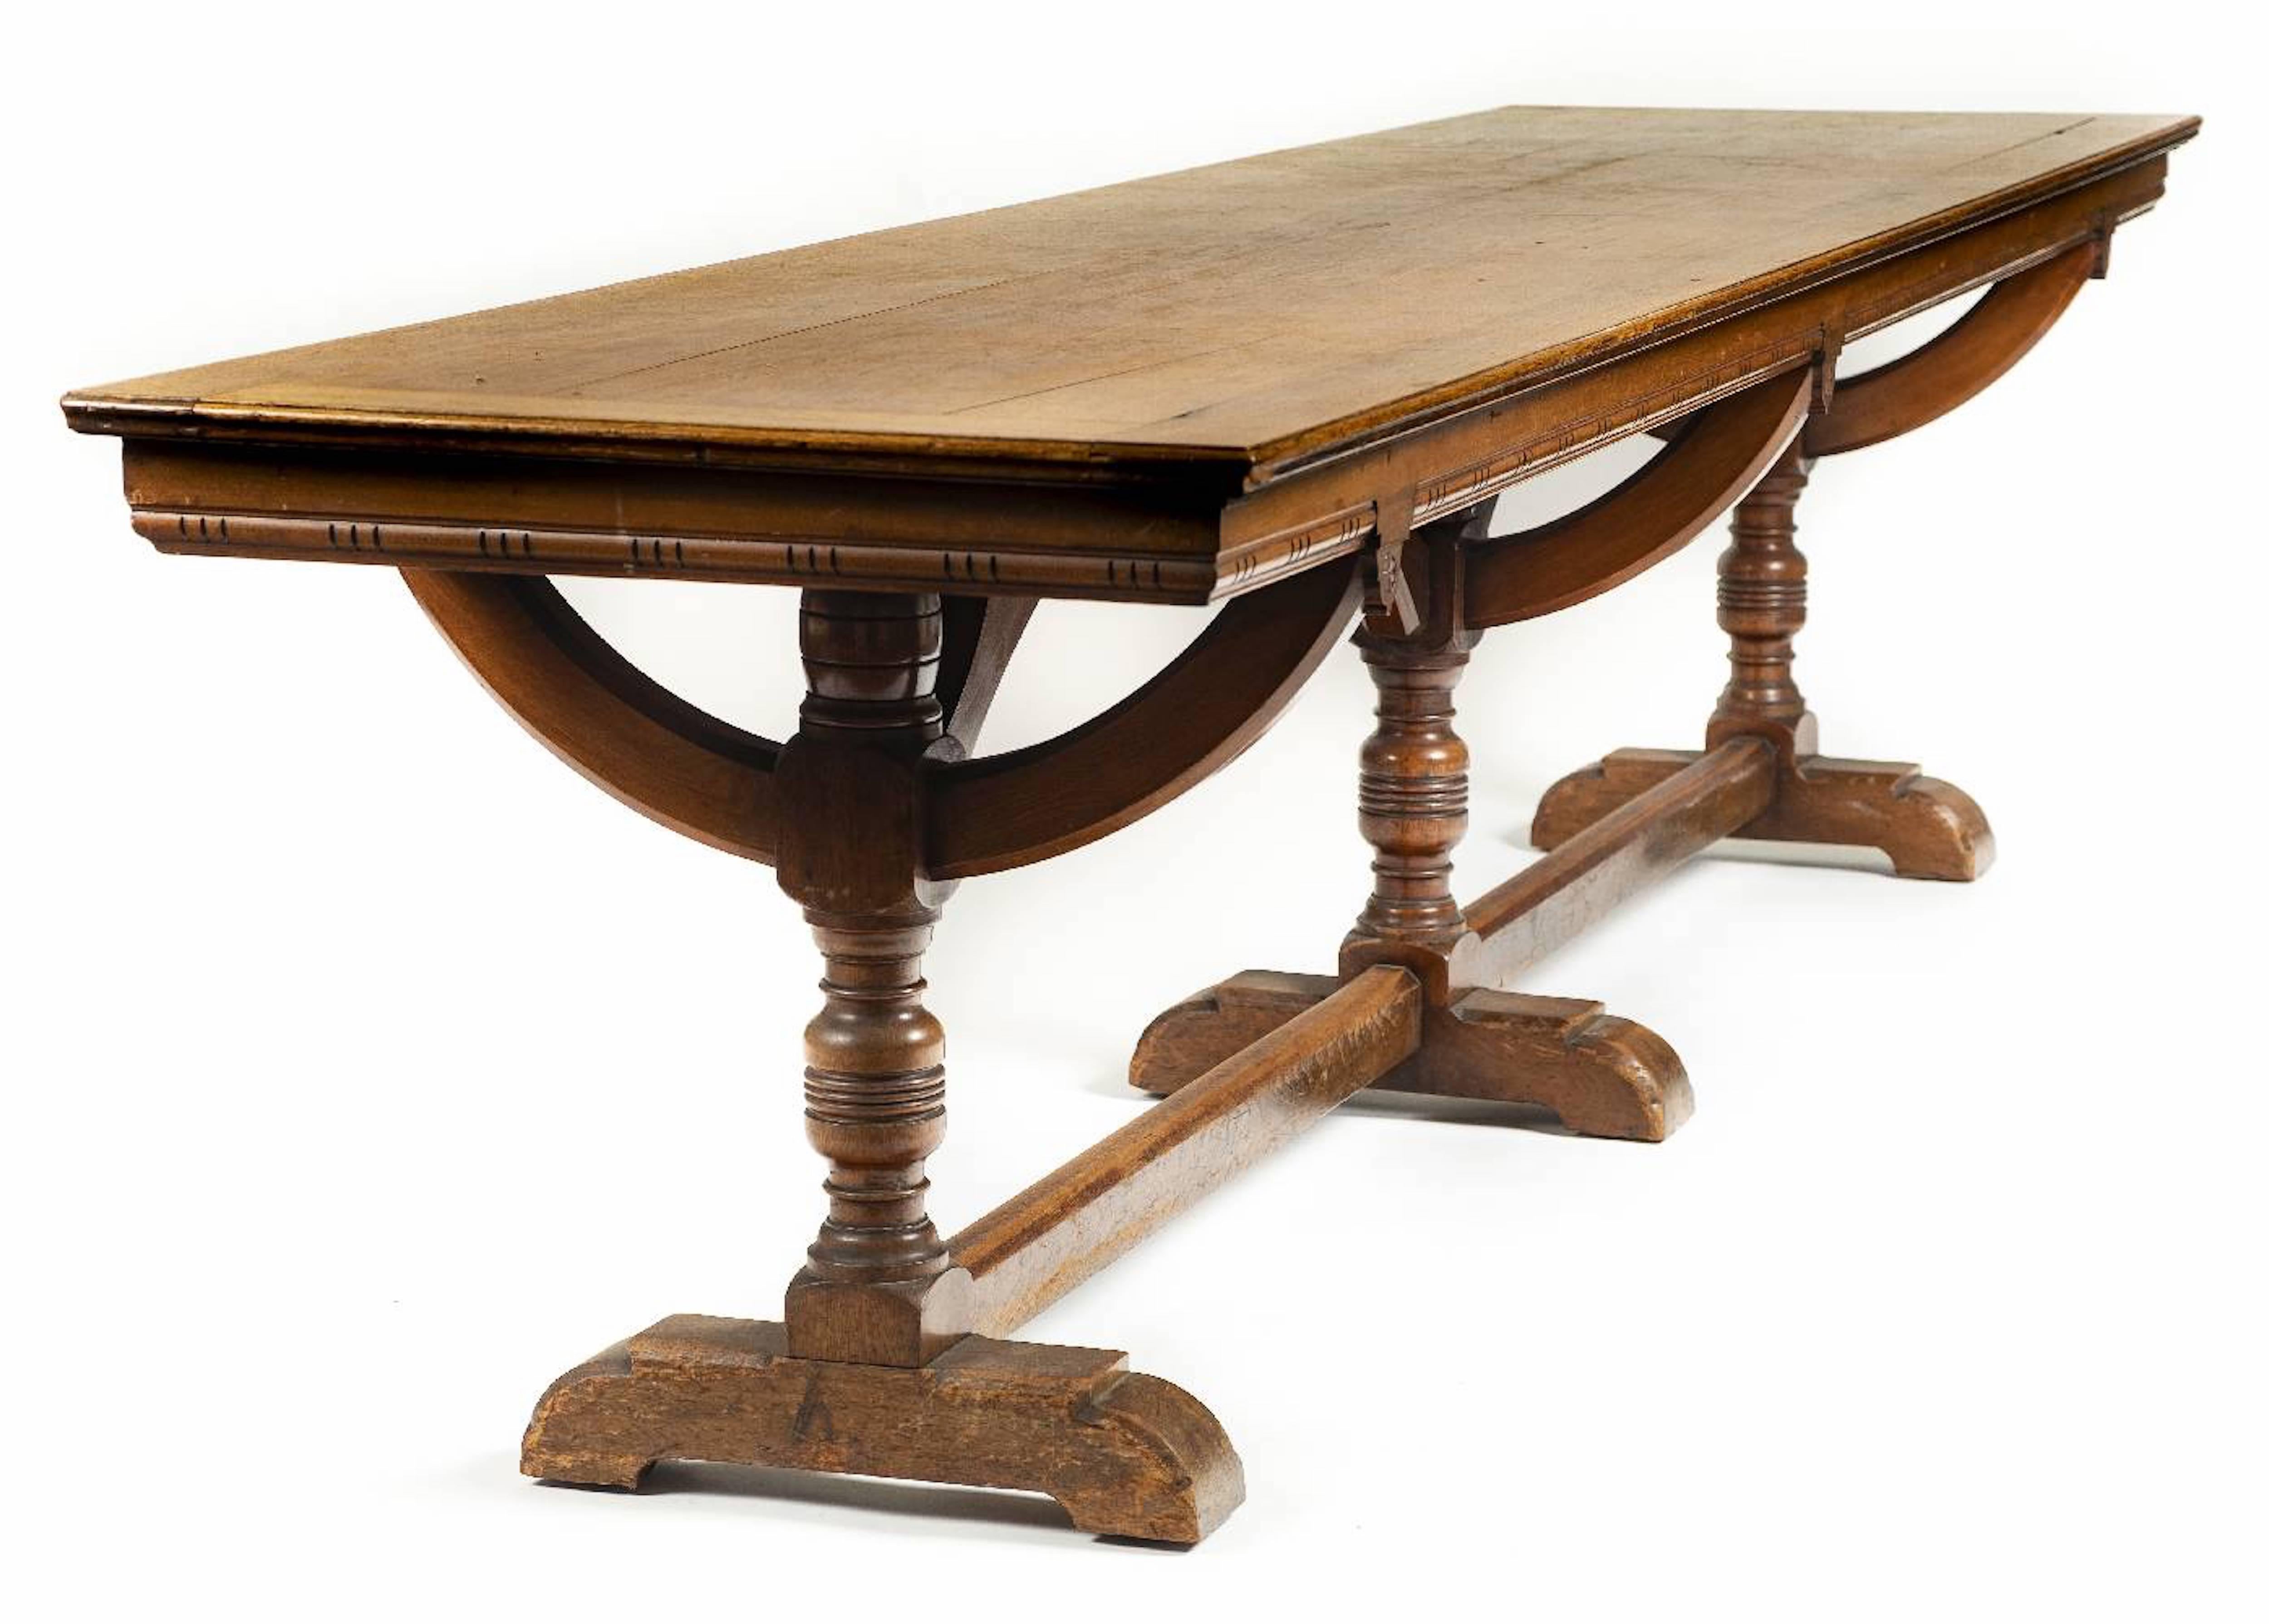 English Table, Pair, Long, Library, Dining, Centre, Writing, Desk, 19th Century